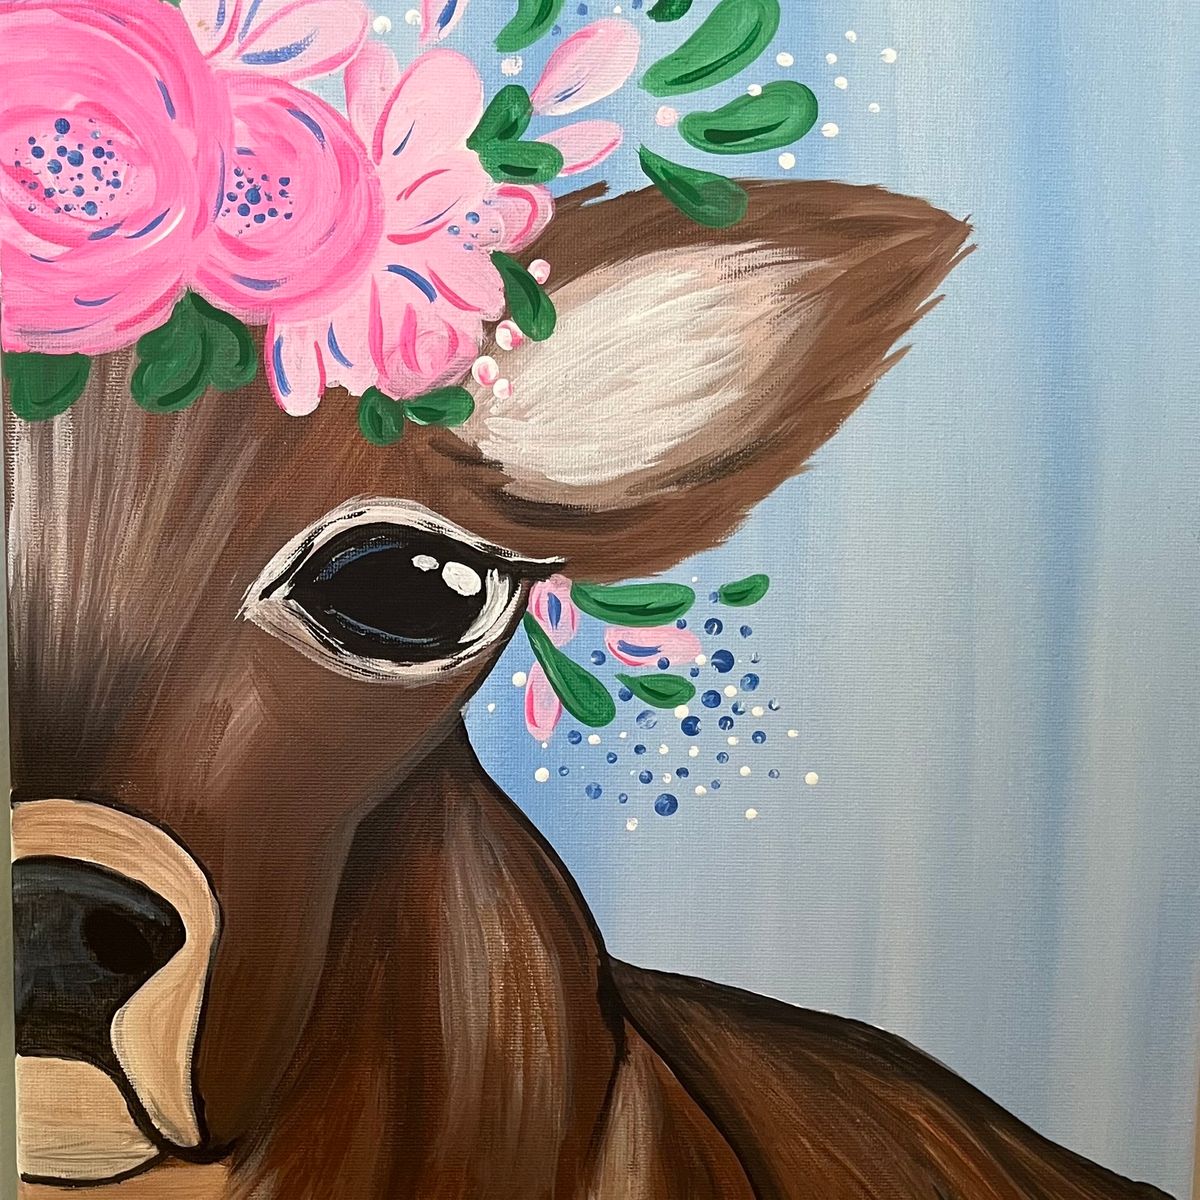 Let's Paint a Summer Cow at Sweet Beans!